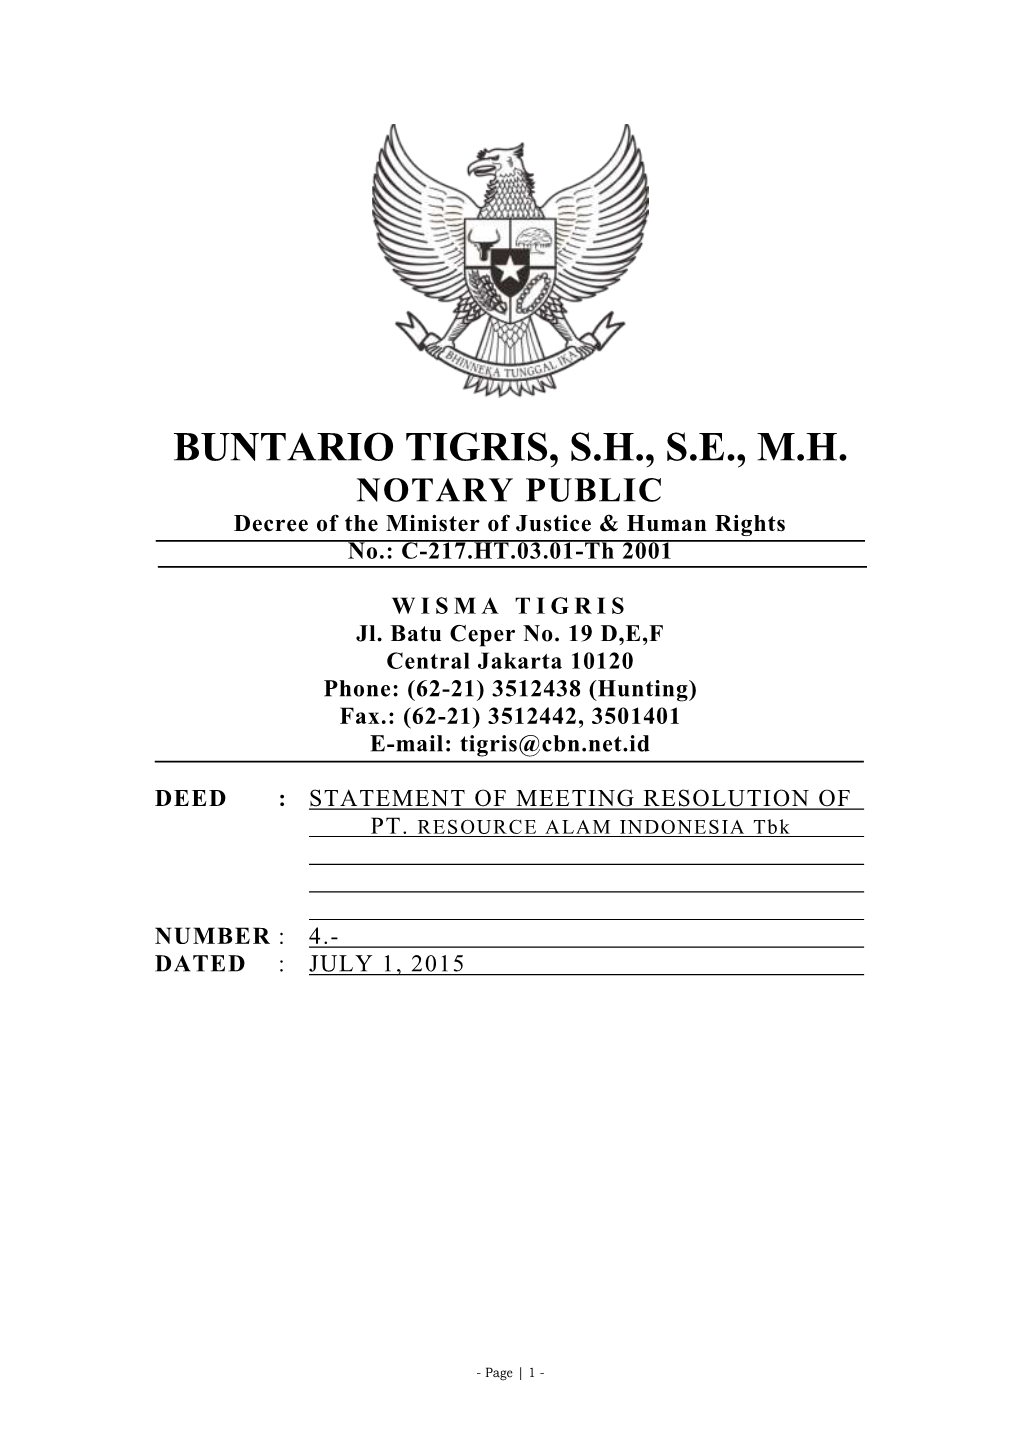 BUNTARIO TIGRIS, S.H., S.E., M.H. NOTARY PUBLIC Decree of the Minister of Justice & Human Rights No.: C-217.HT.03.01-Th 2001